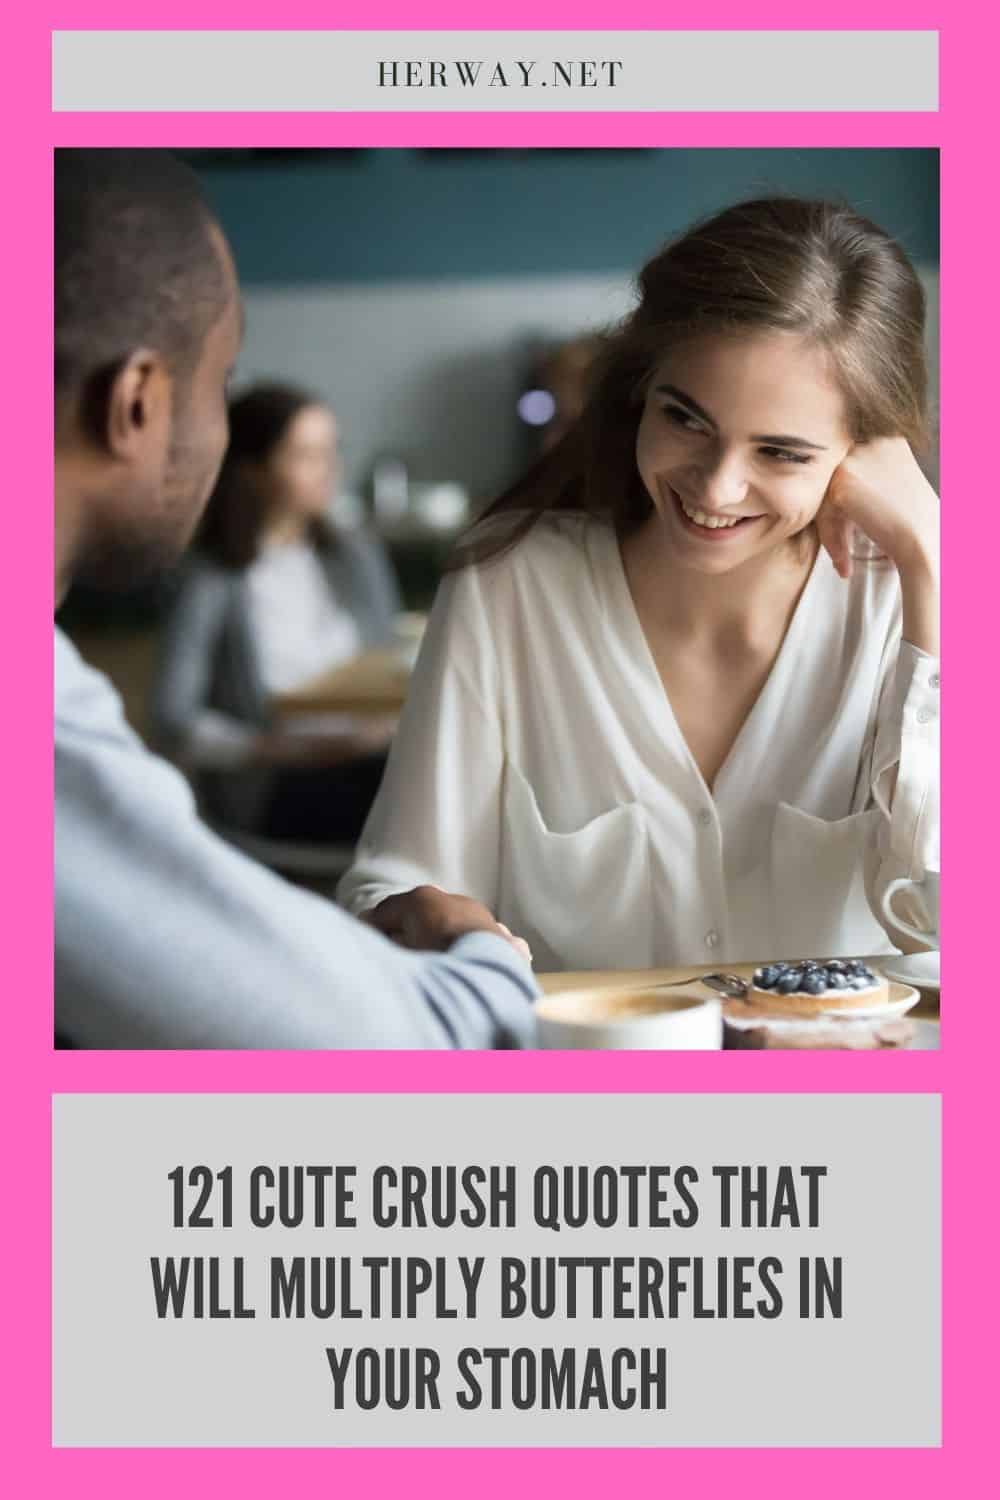 121 Cute Crush Quotes That Will Multiply Butterflies In Your Stomach